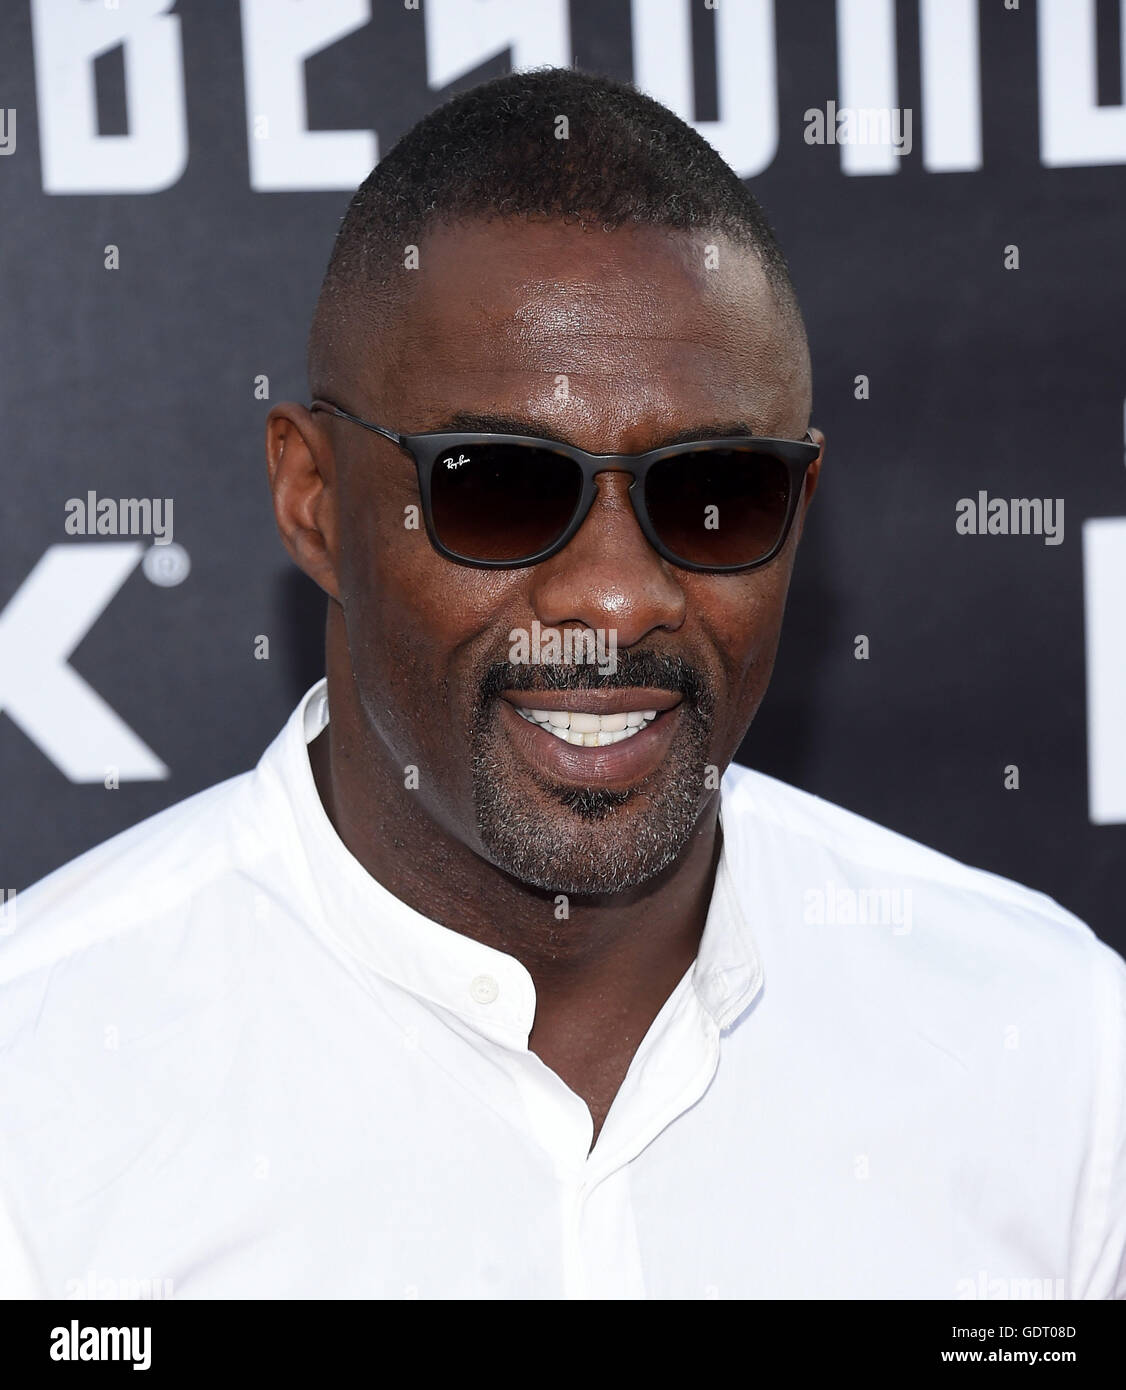 San Diego, California, USA. 20th July, 2016. Idris Elba arrives for the premiere of the film 'Star Trek Beyond' at the Embarcadero Marina Park. Credit:  Lisa O'Connor/ZUMA Wire/Alamy Live News Stock Photo